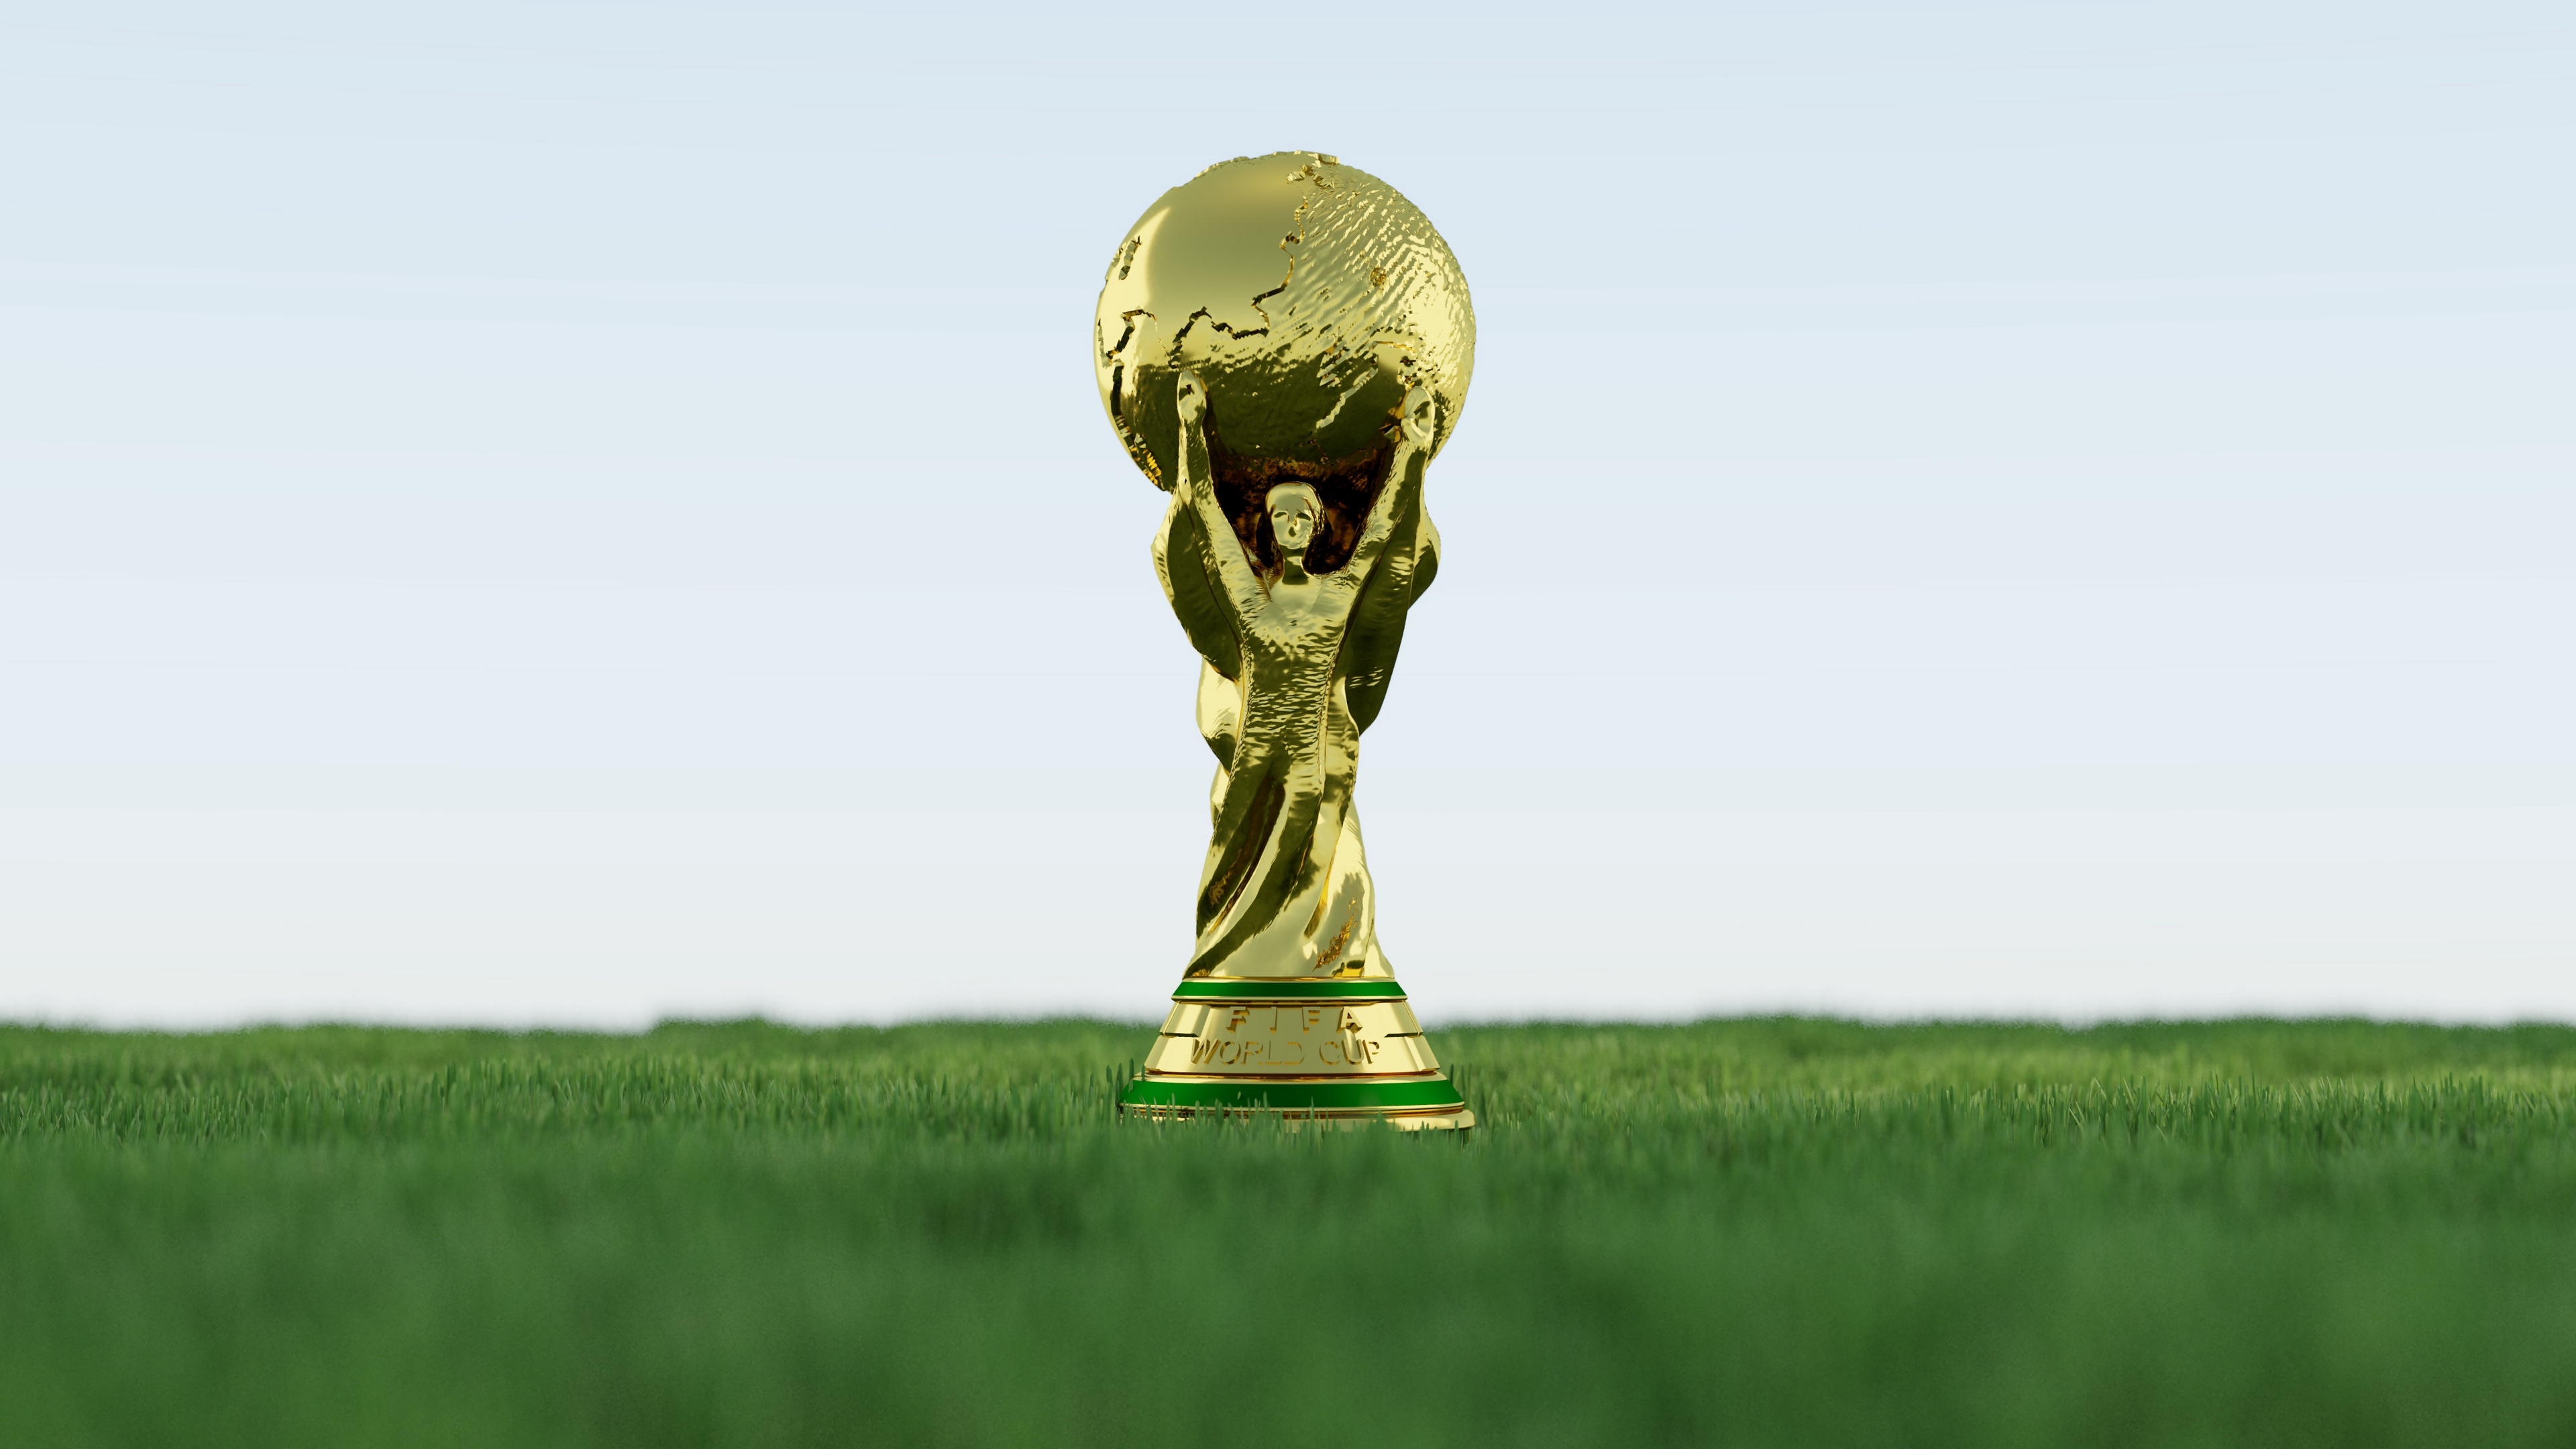 15 Best FIFA World Cup 2022 wallpapers for iPhone Free download   iGeeksBlog